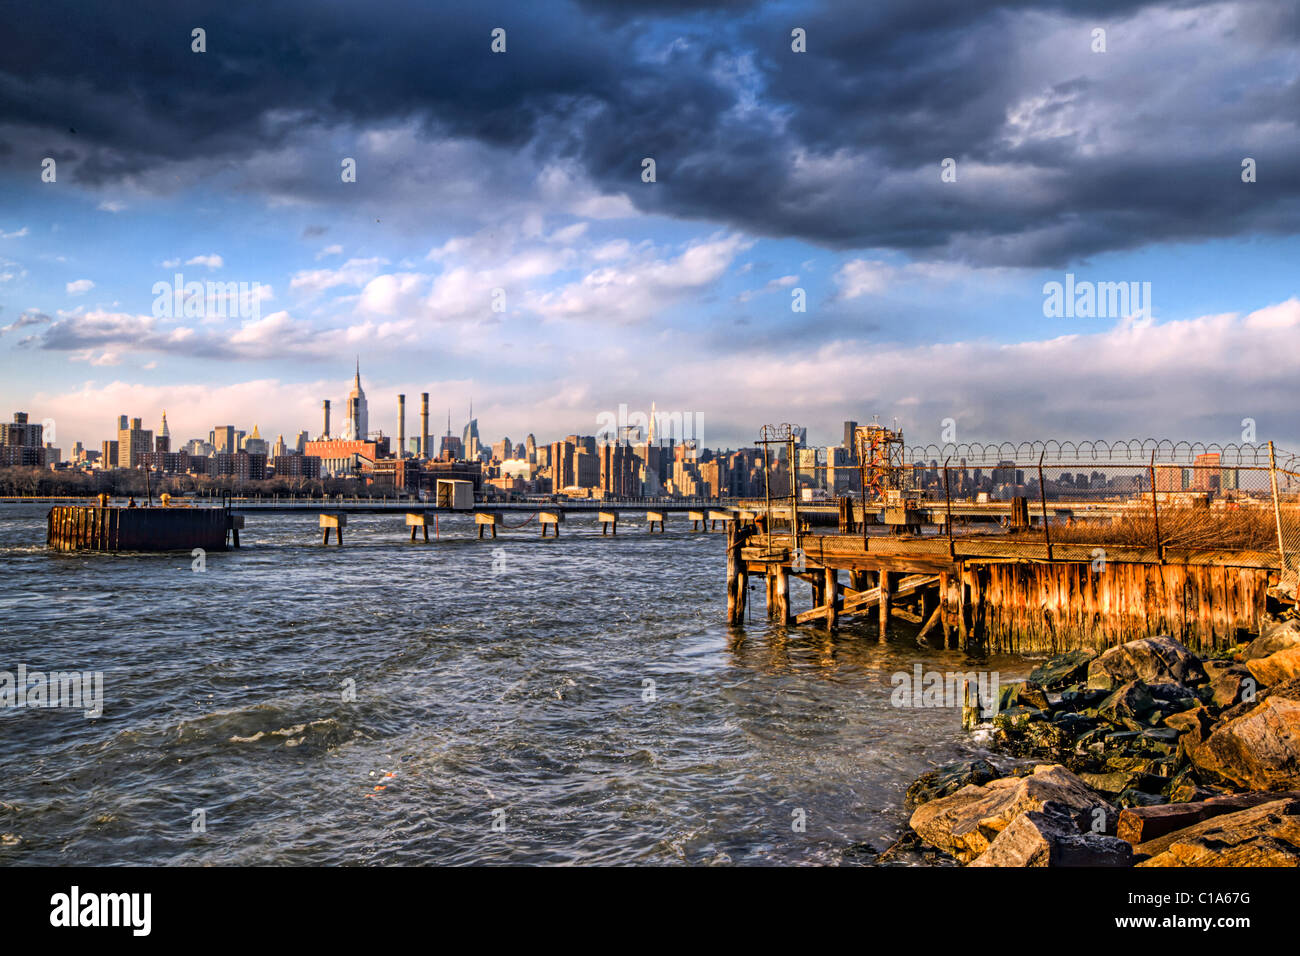 Midtown Manhattan under a dramatic sky seen from the Williamsburg section of Brooklyn across the East River Stock Photo